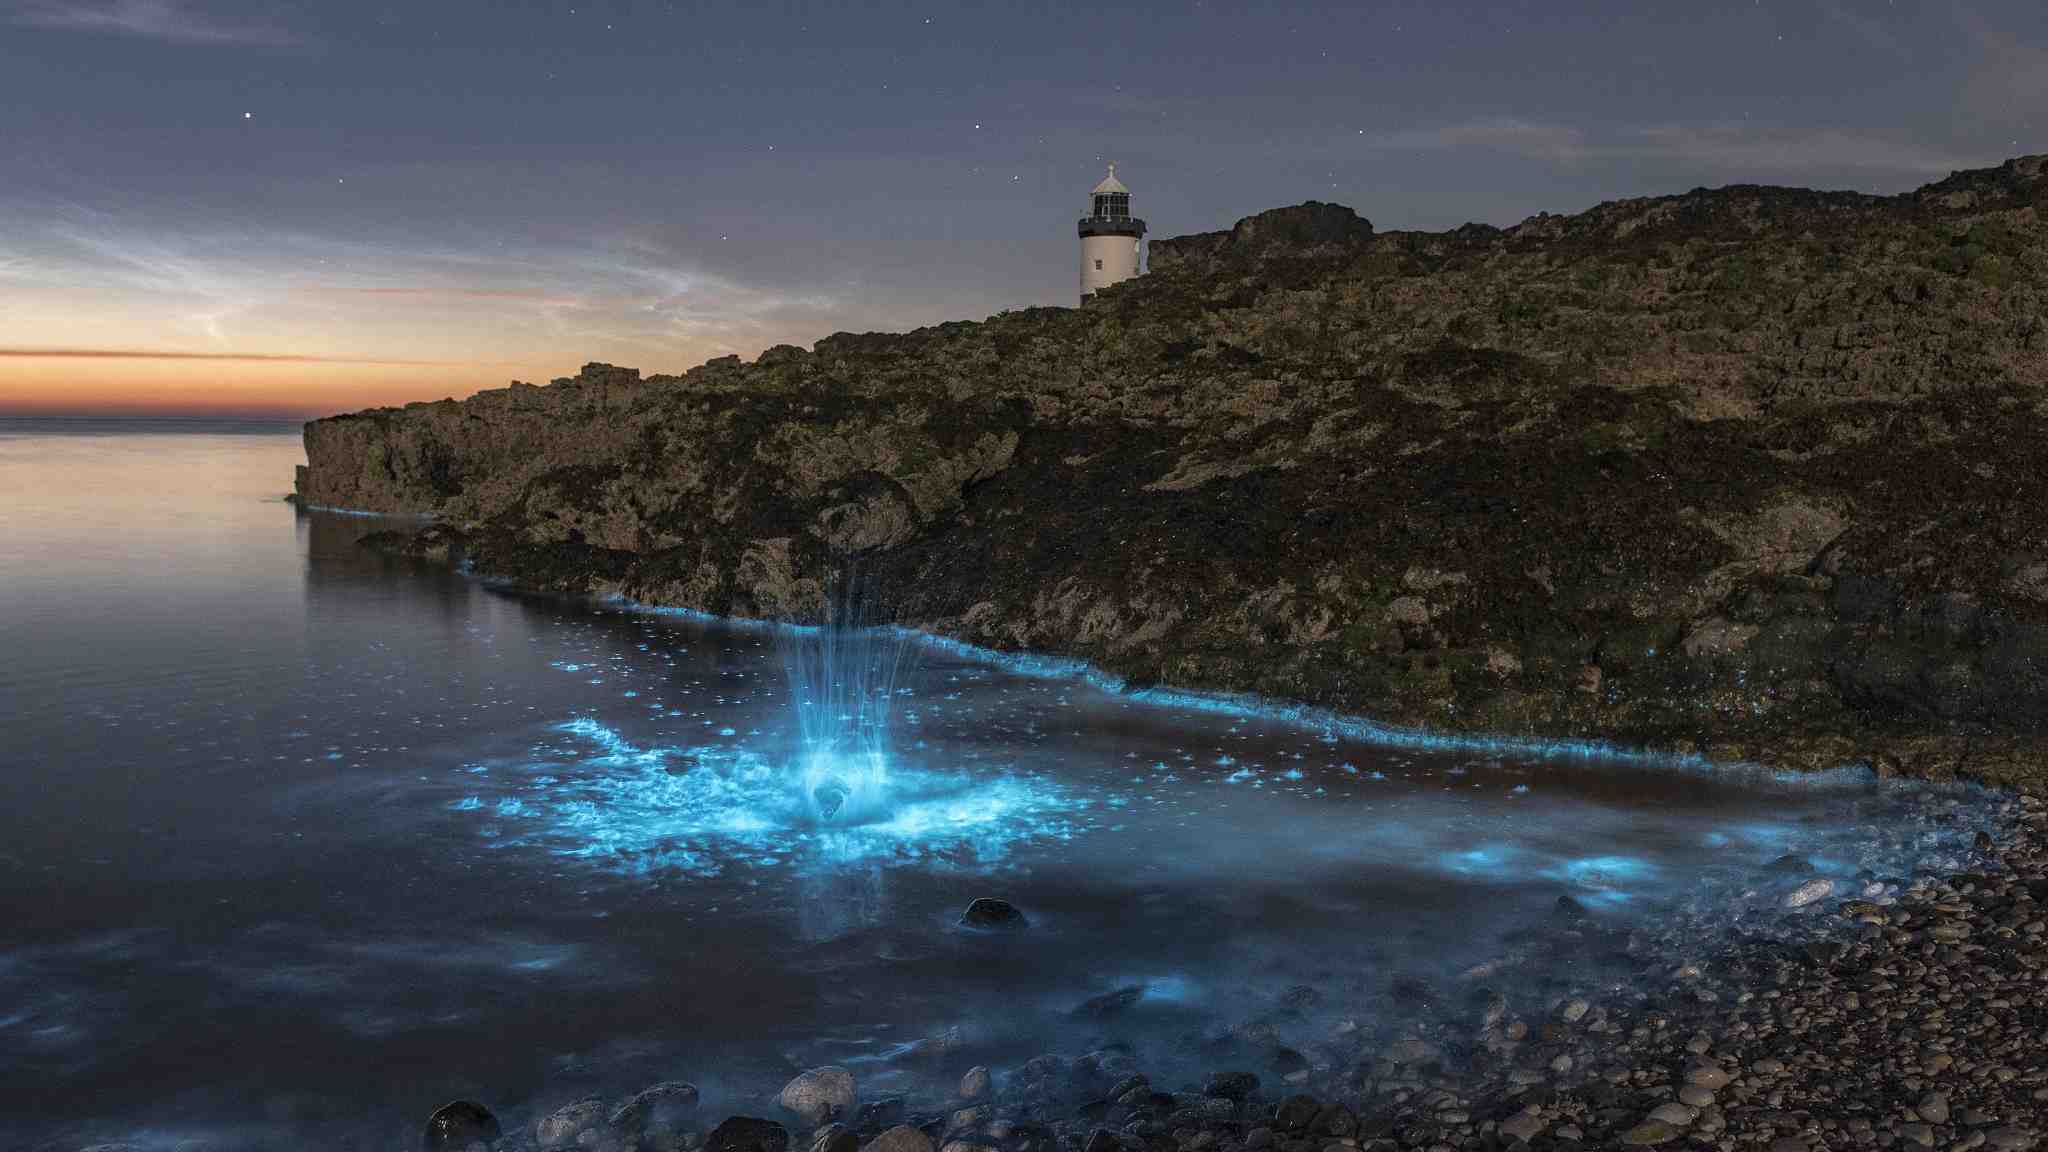 Bioluminescent plankton light up the tranquil ocean in Wales